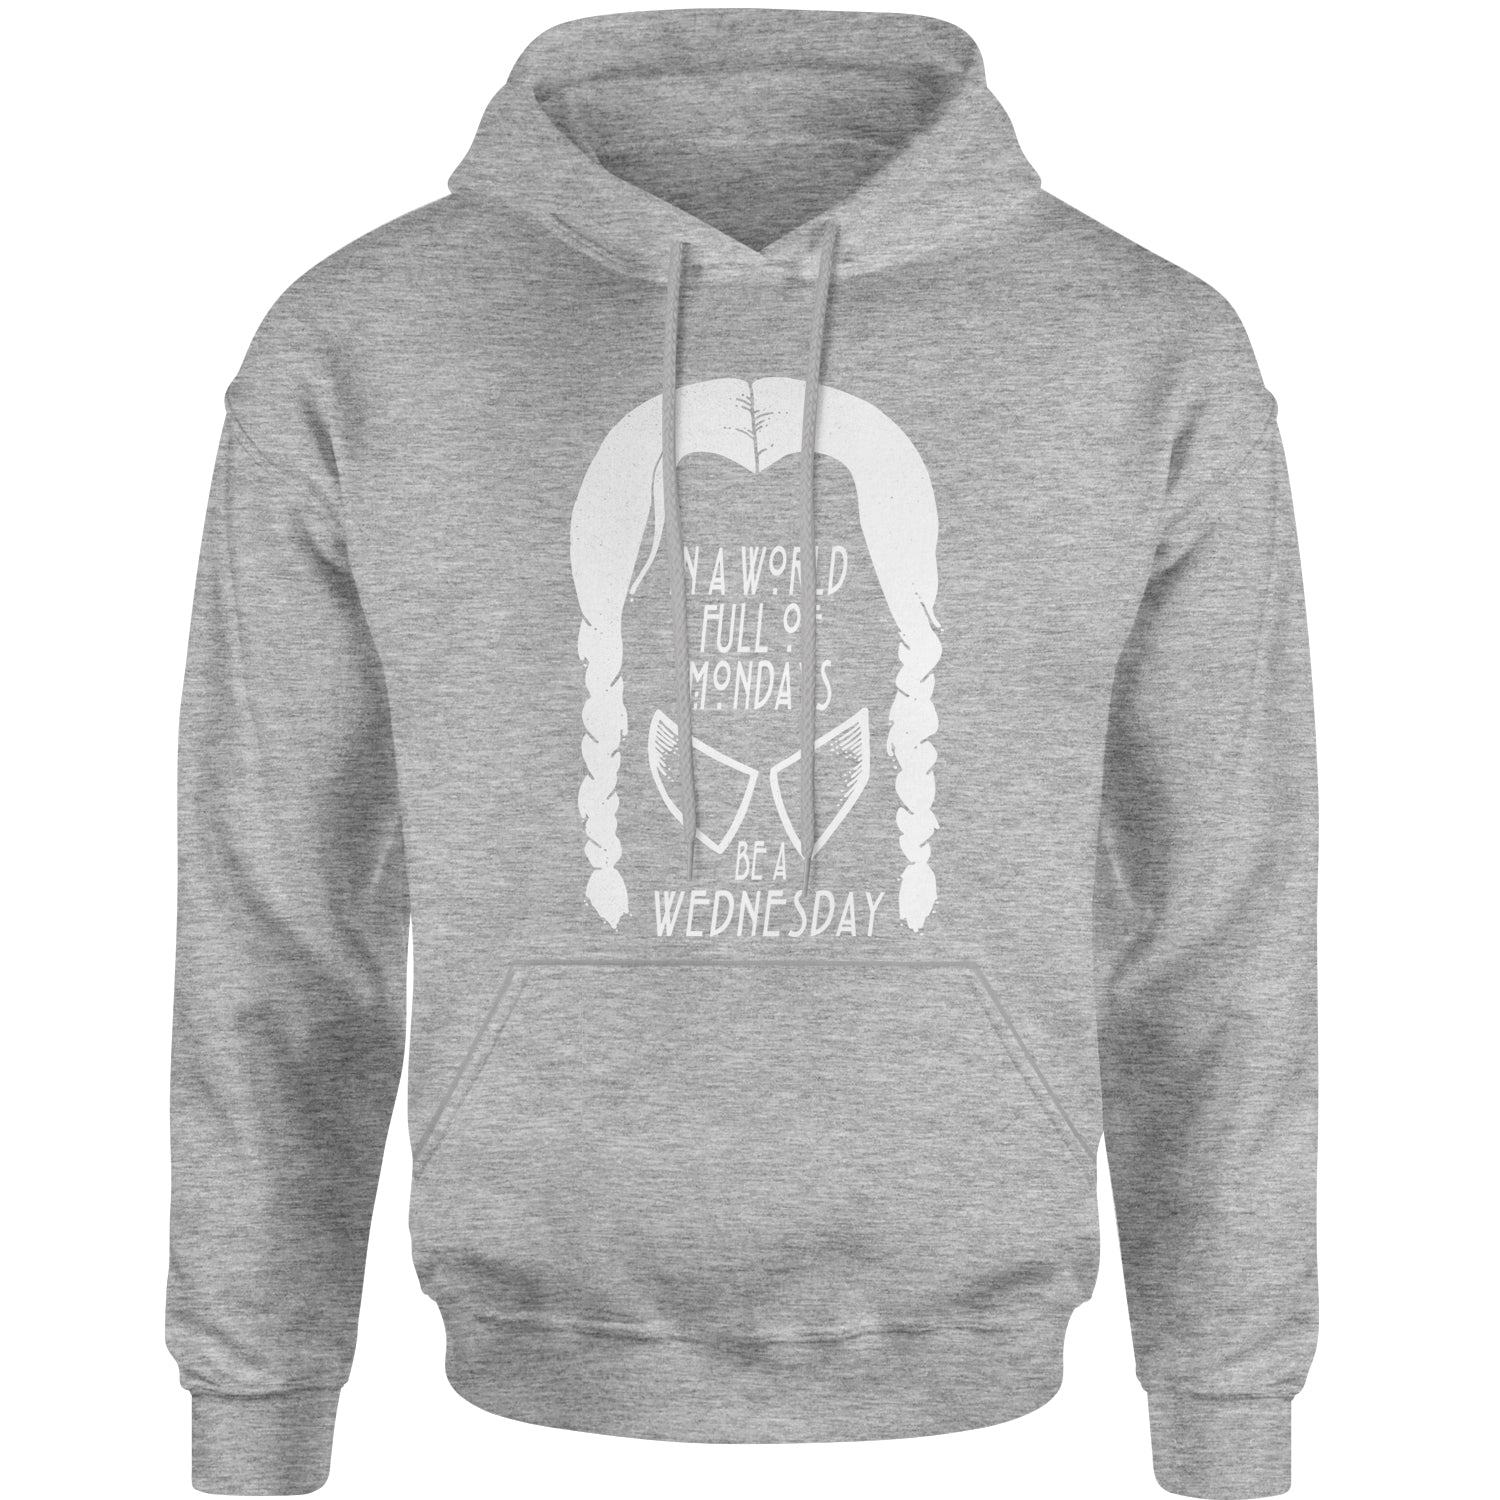 In A World Full Of Mondays, Be A Wednesday Adult Hoodie Sweatshirt academy, jericho, more, never, nevermore, vermont, Wednesday by Expression Tees